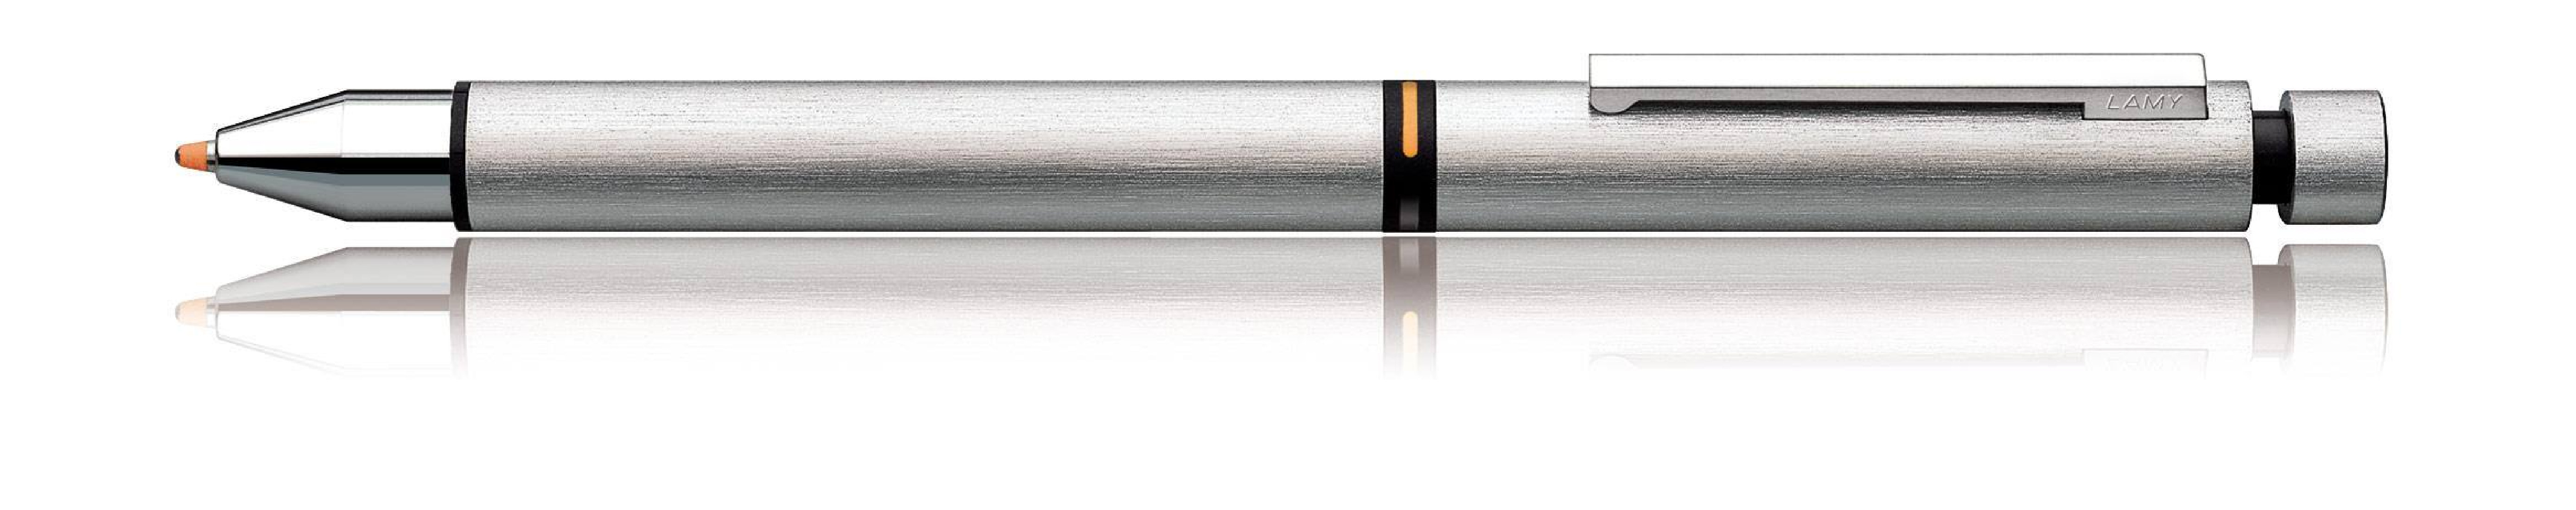 LAMY CP1 759 TRI PEN BRUSHED STAINLESS STEEL MOD.